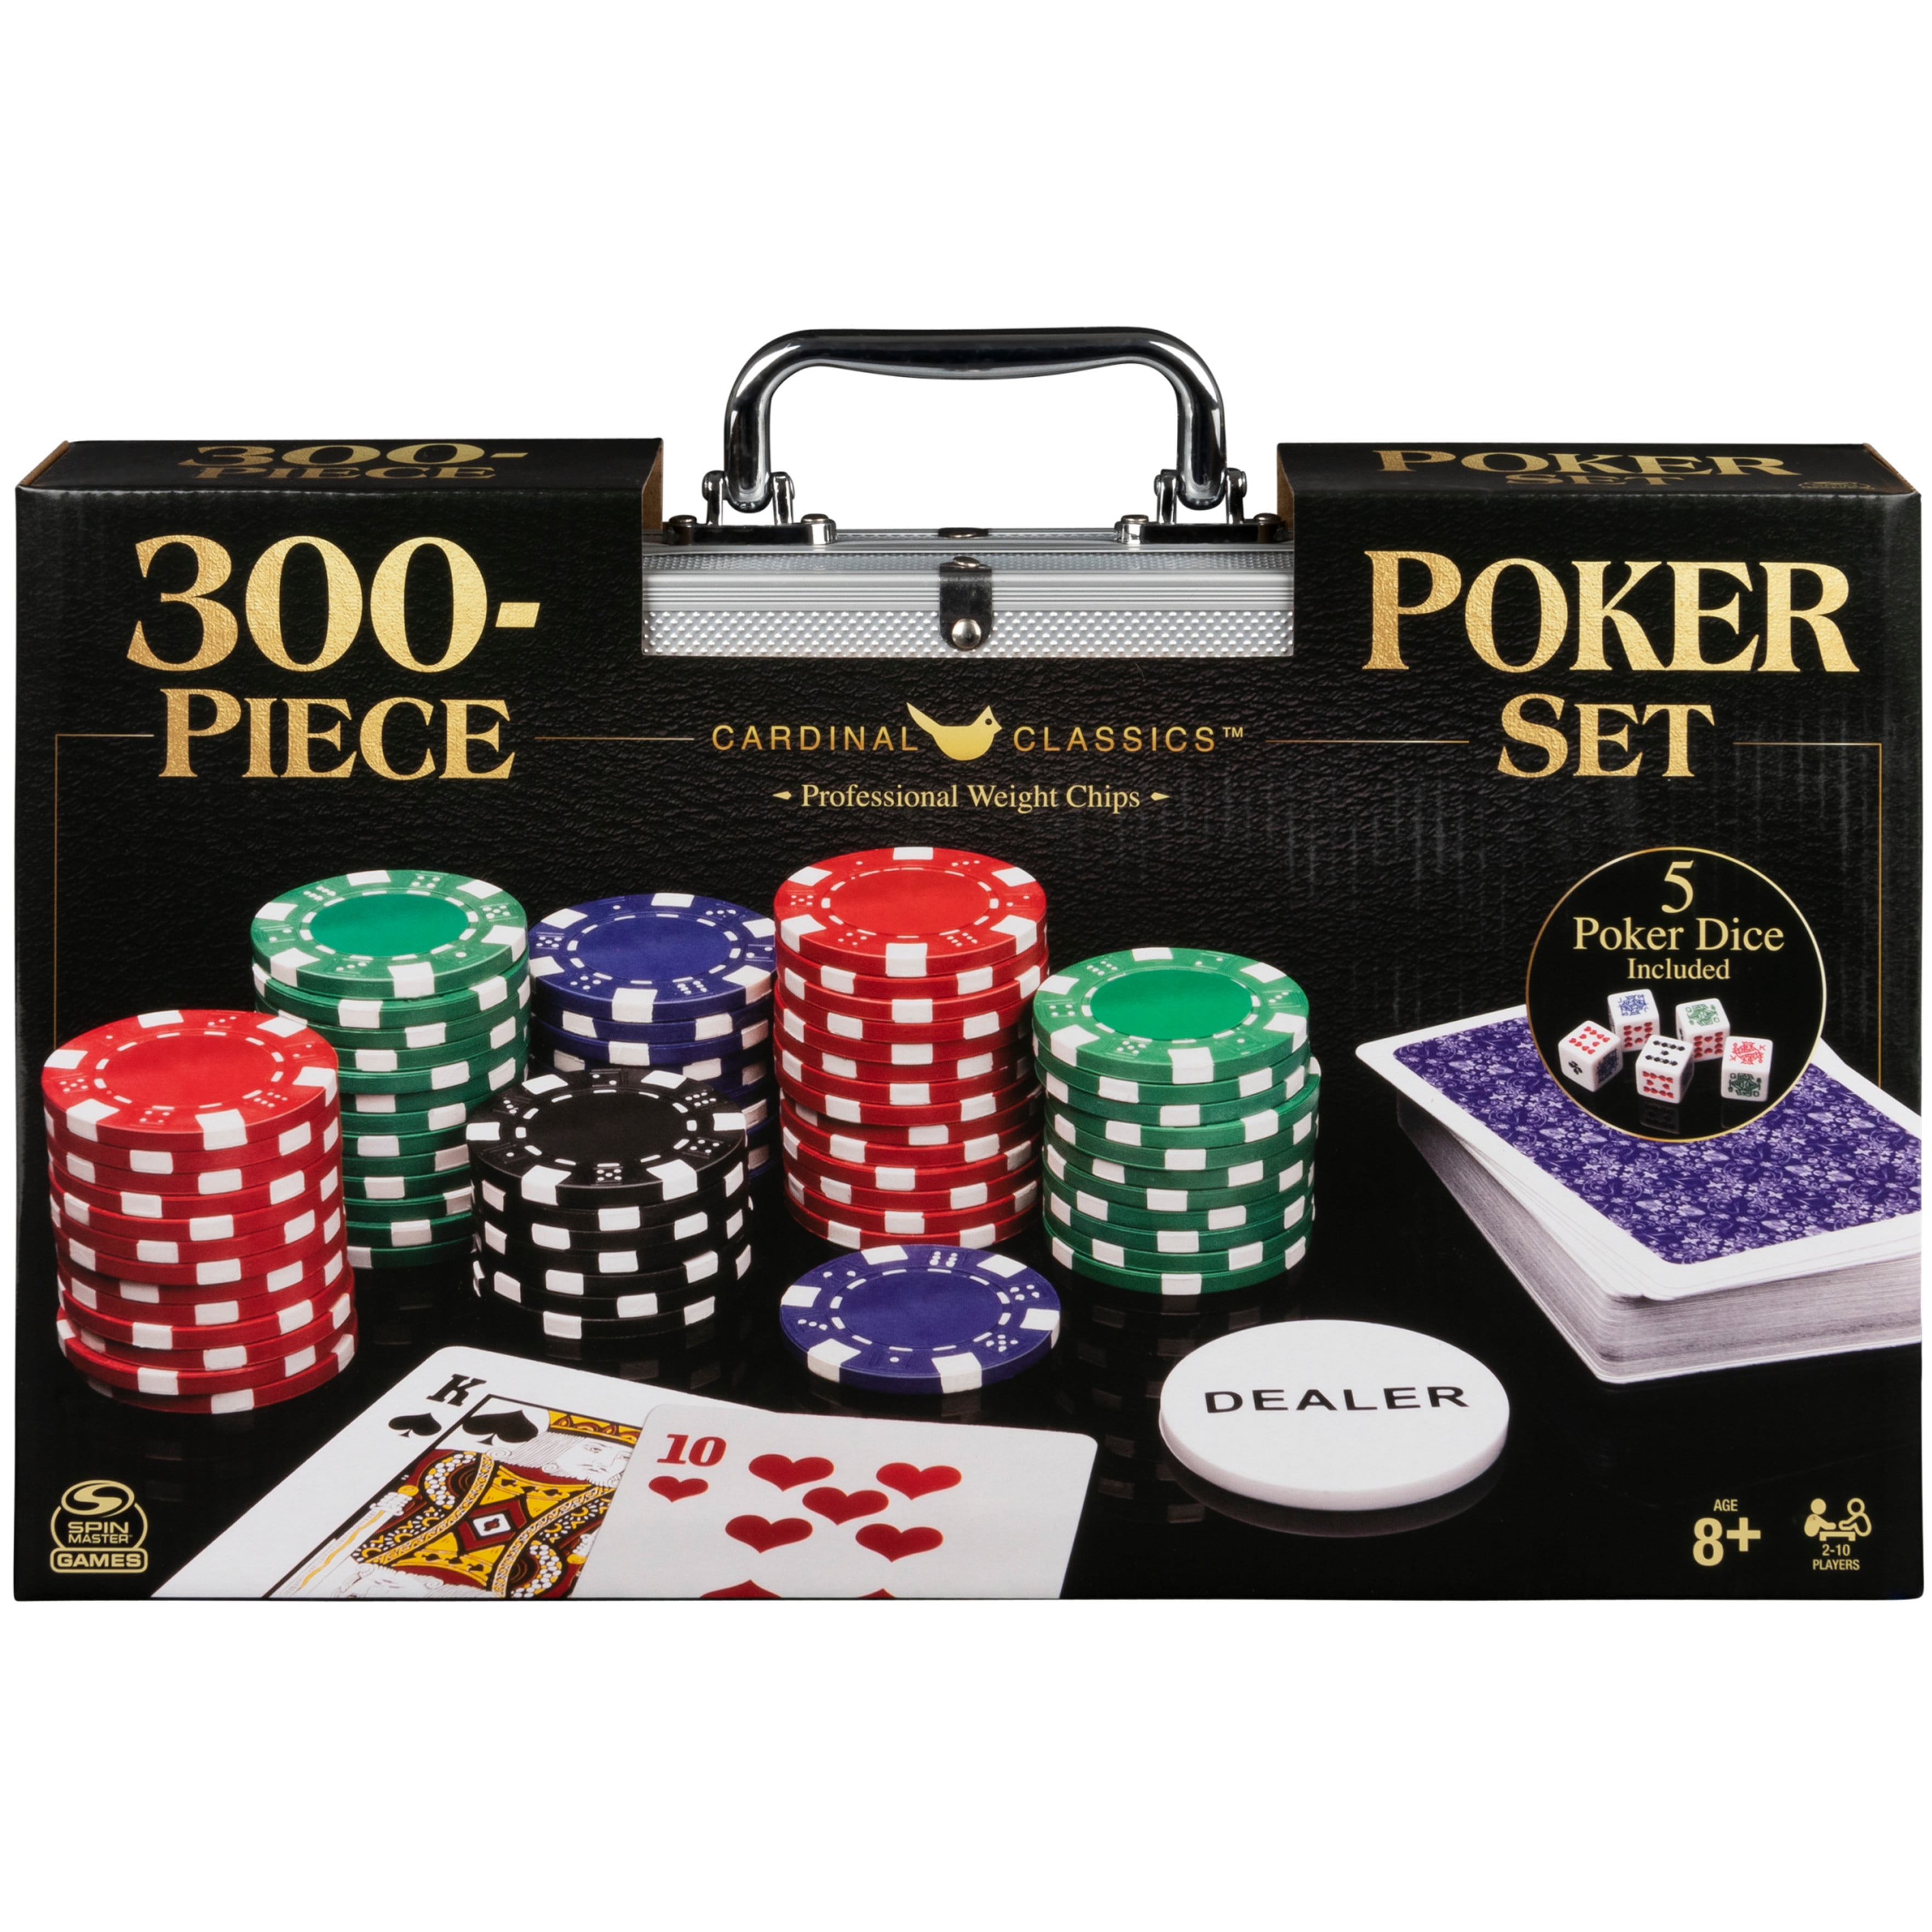 Cardinal 200 Piece Poker Set In Aluminum Carry Case New in Box 